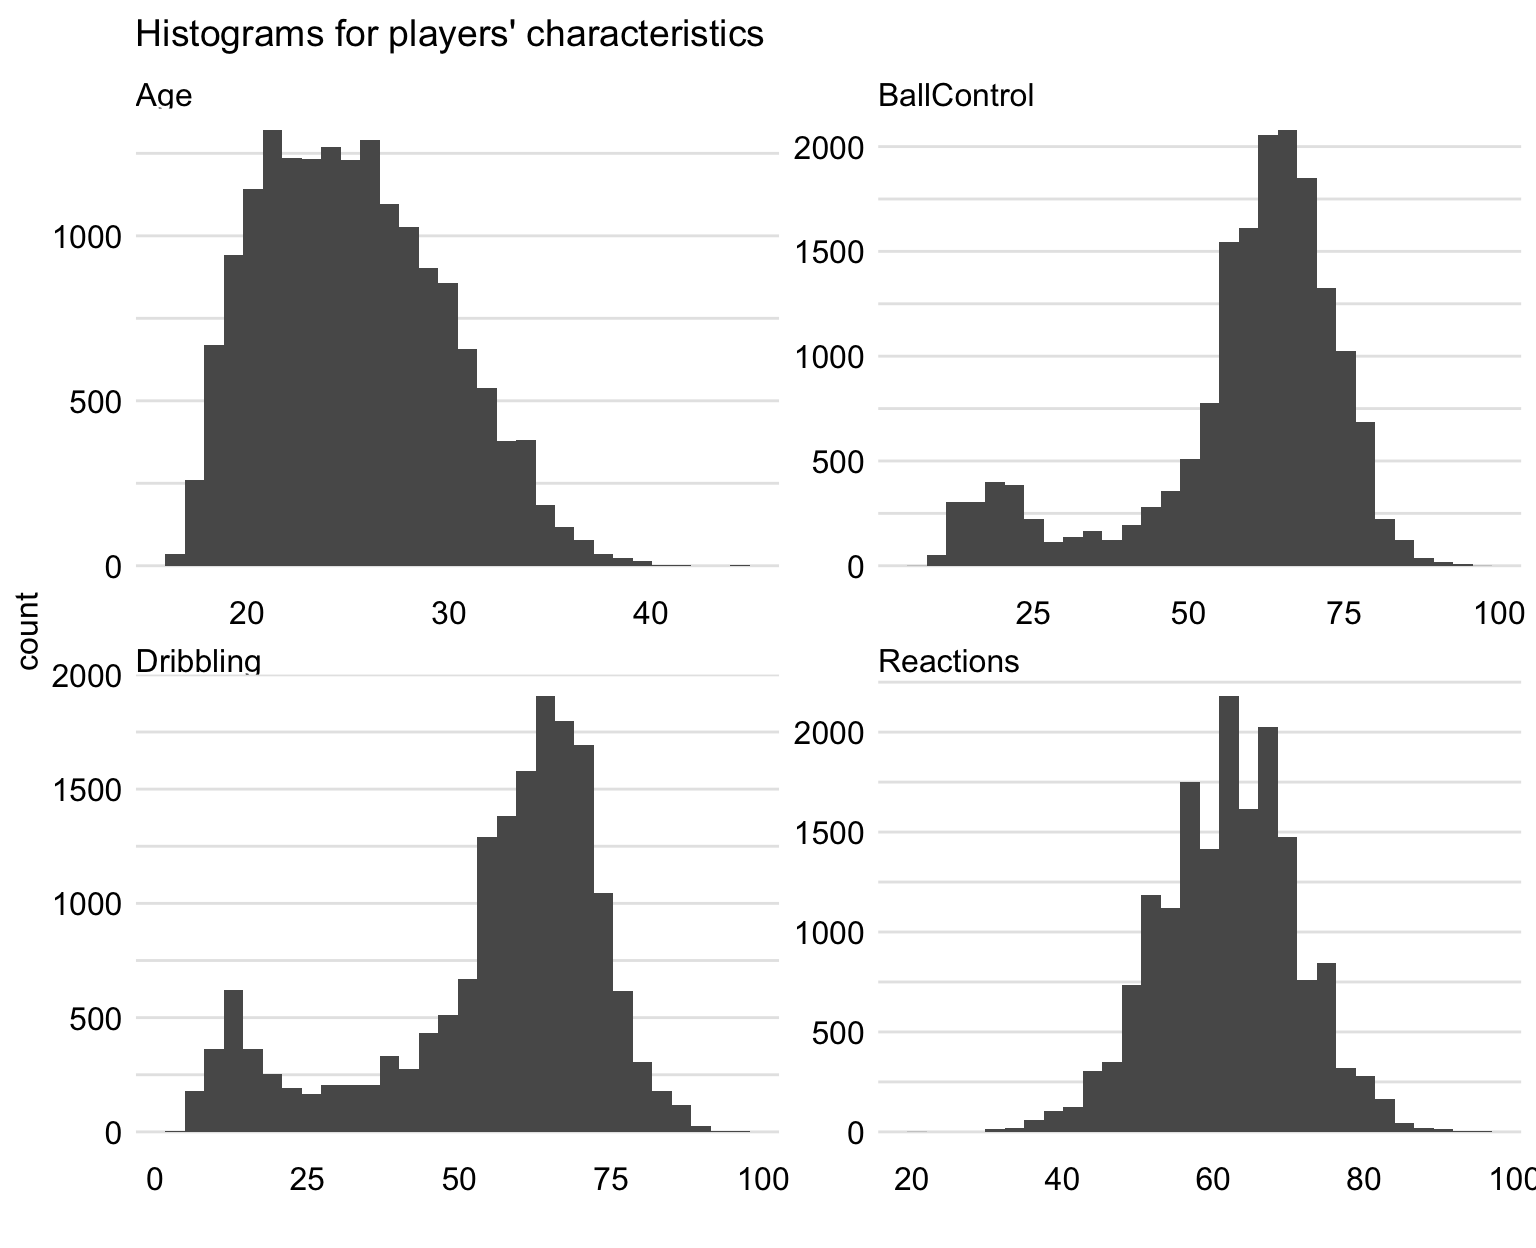 Histograms for selected characteristics of players.